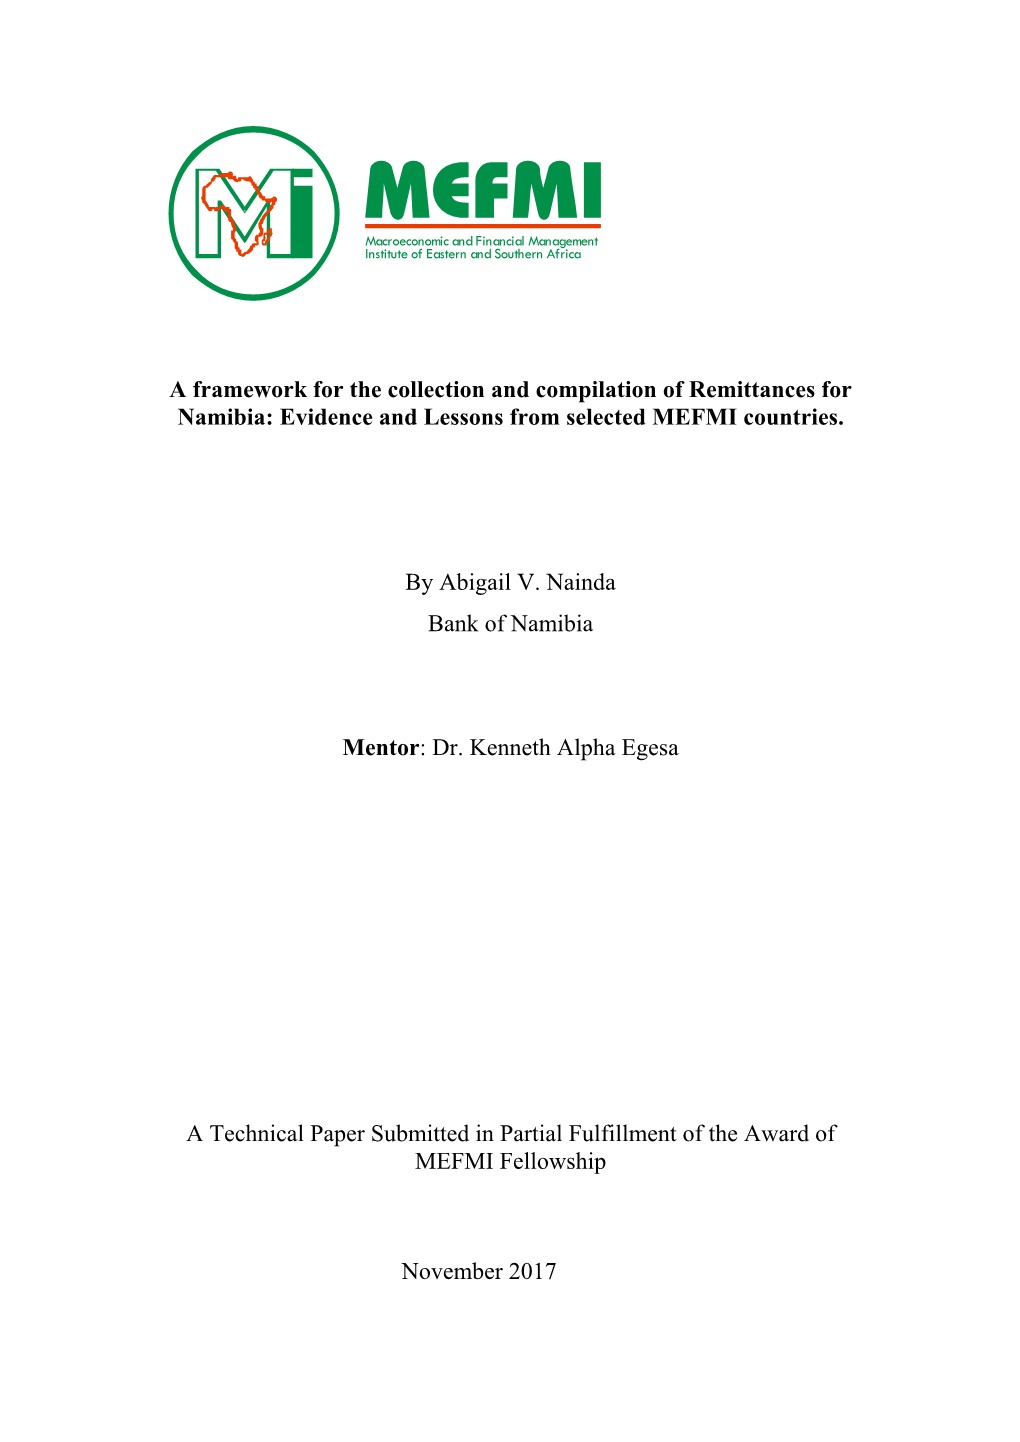 A Framework for the Collection and Compilation of Remittances for Namibia: Evidence and Lessons from Selected MEFMI Countries